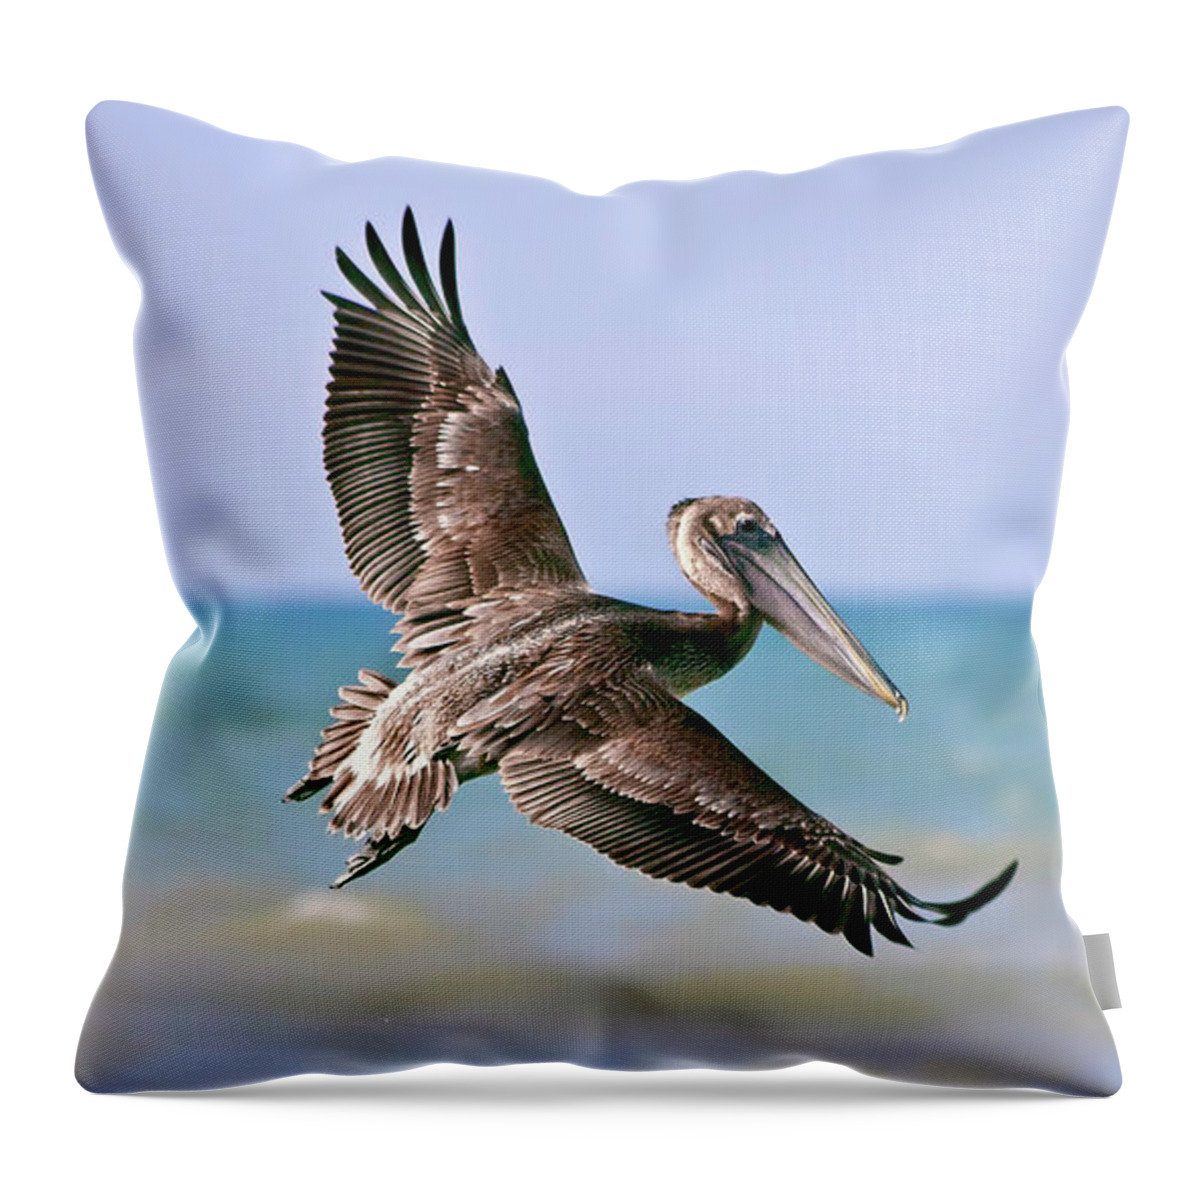 Wing Throw Pillow featuring the photograph Wingspan by Evelina Kremsdorf